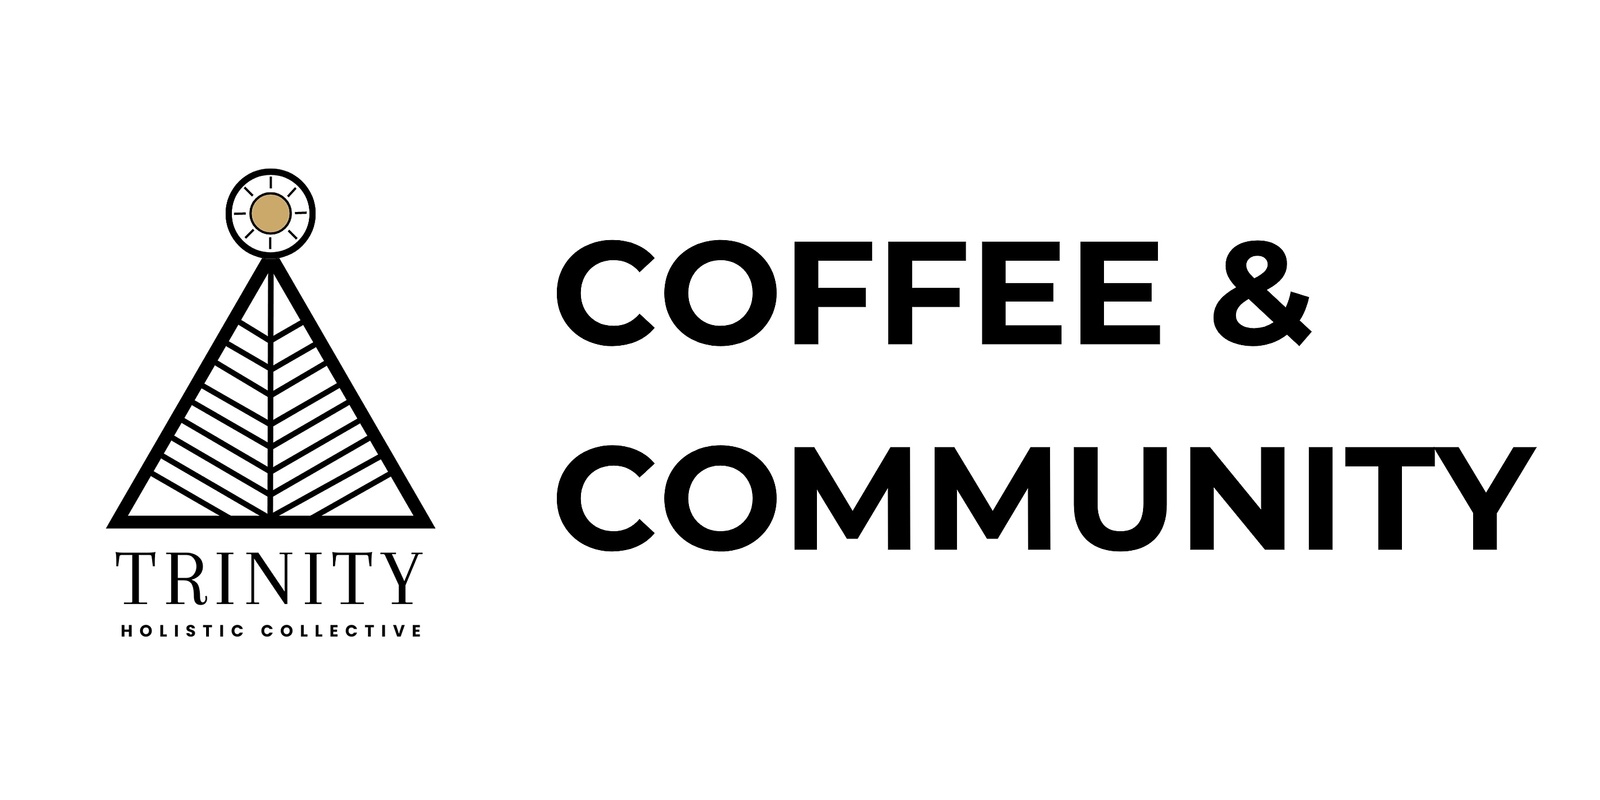 Banner image for Trinity Holistic Collective Coffee & Community 